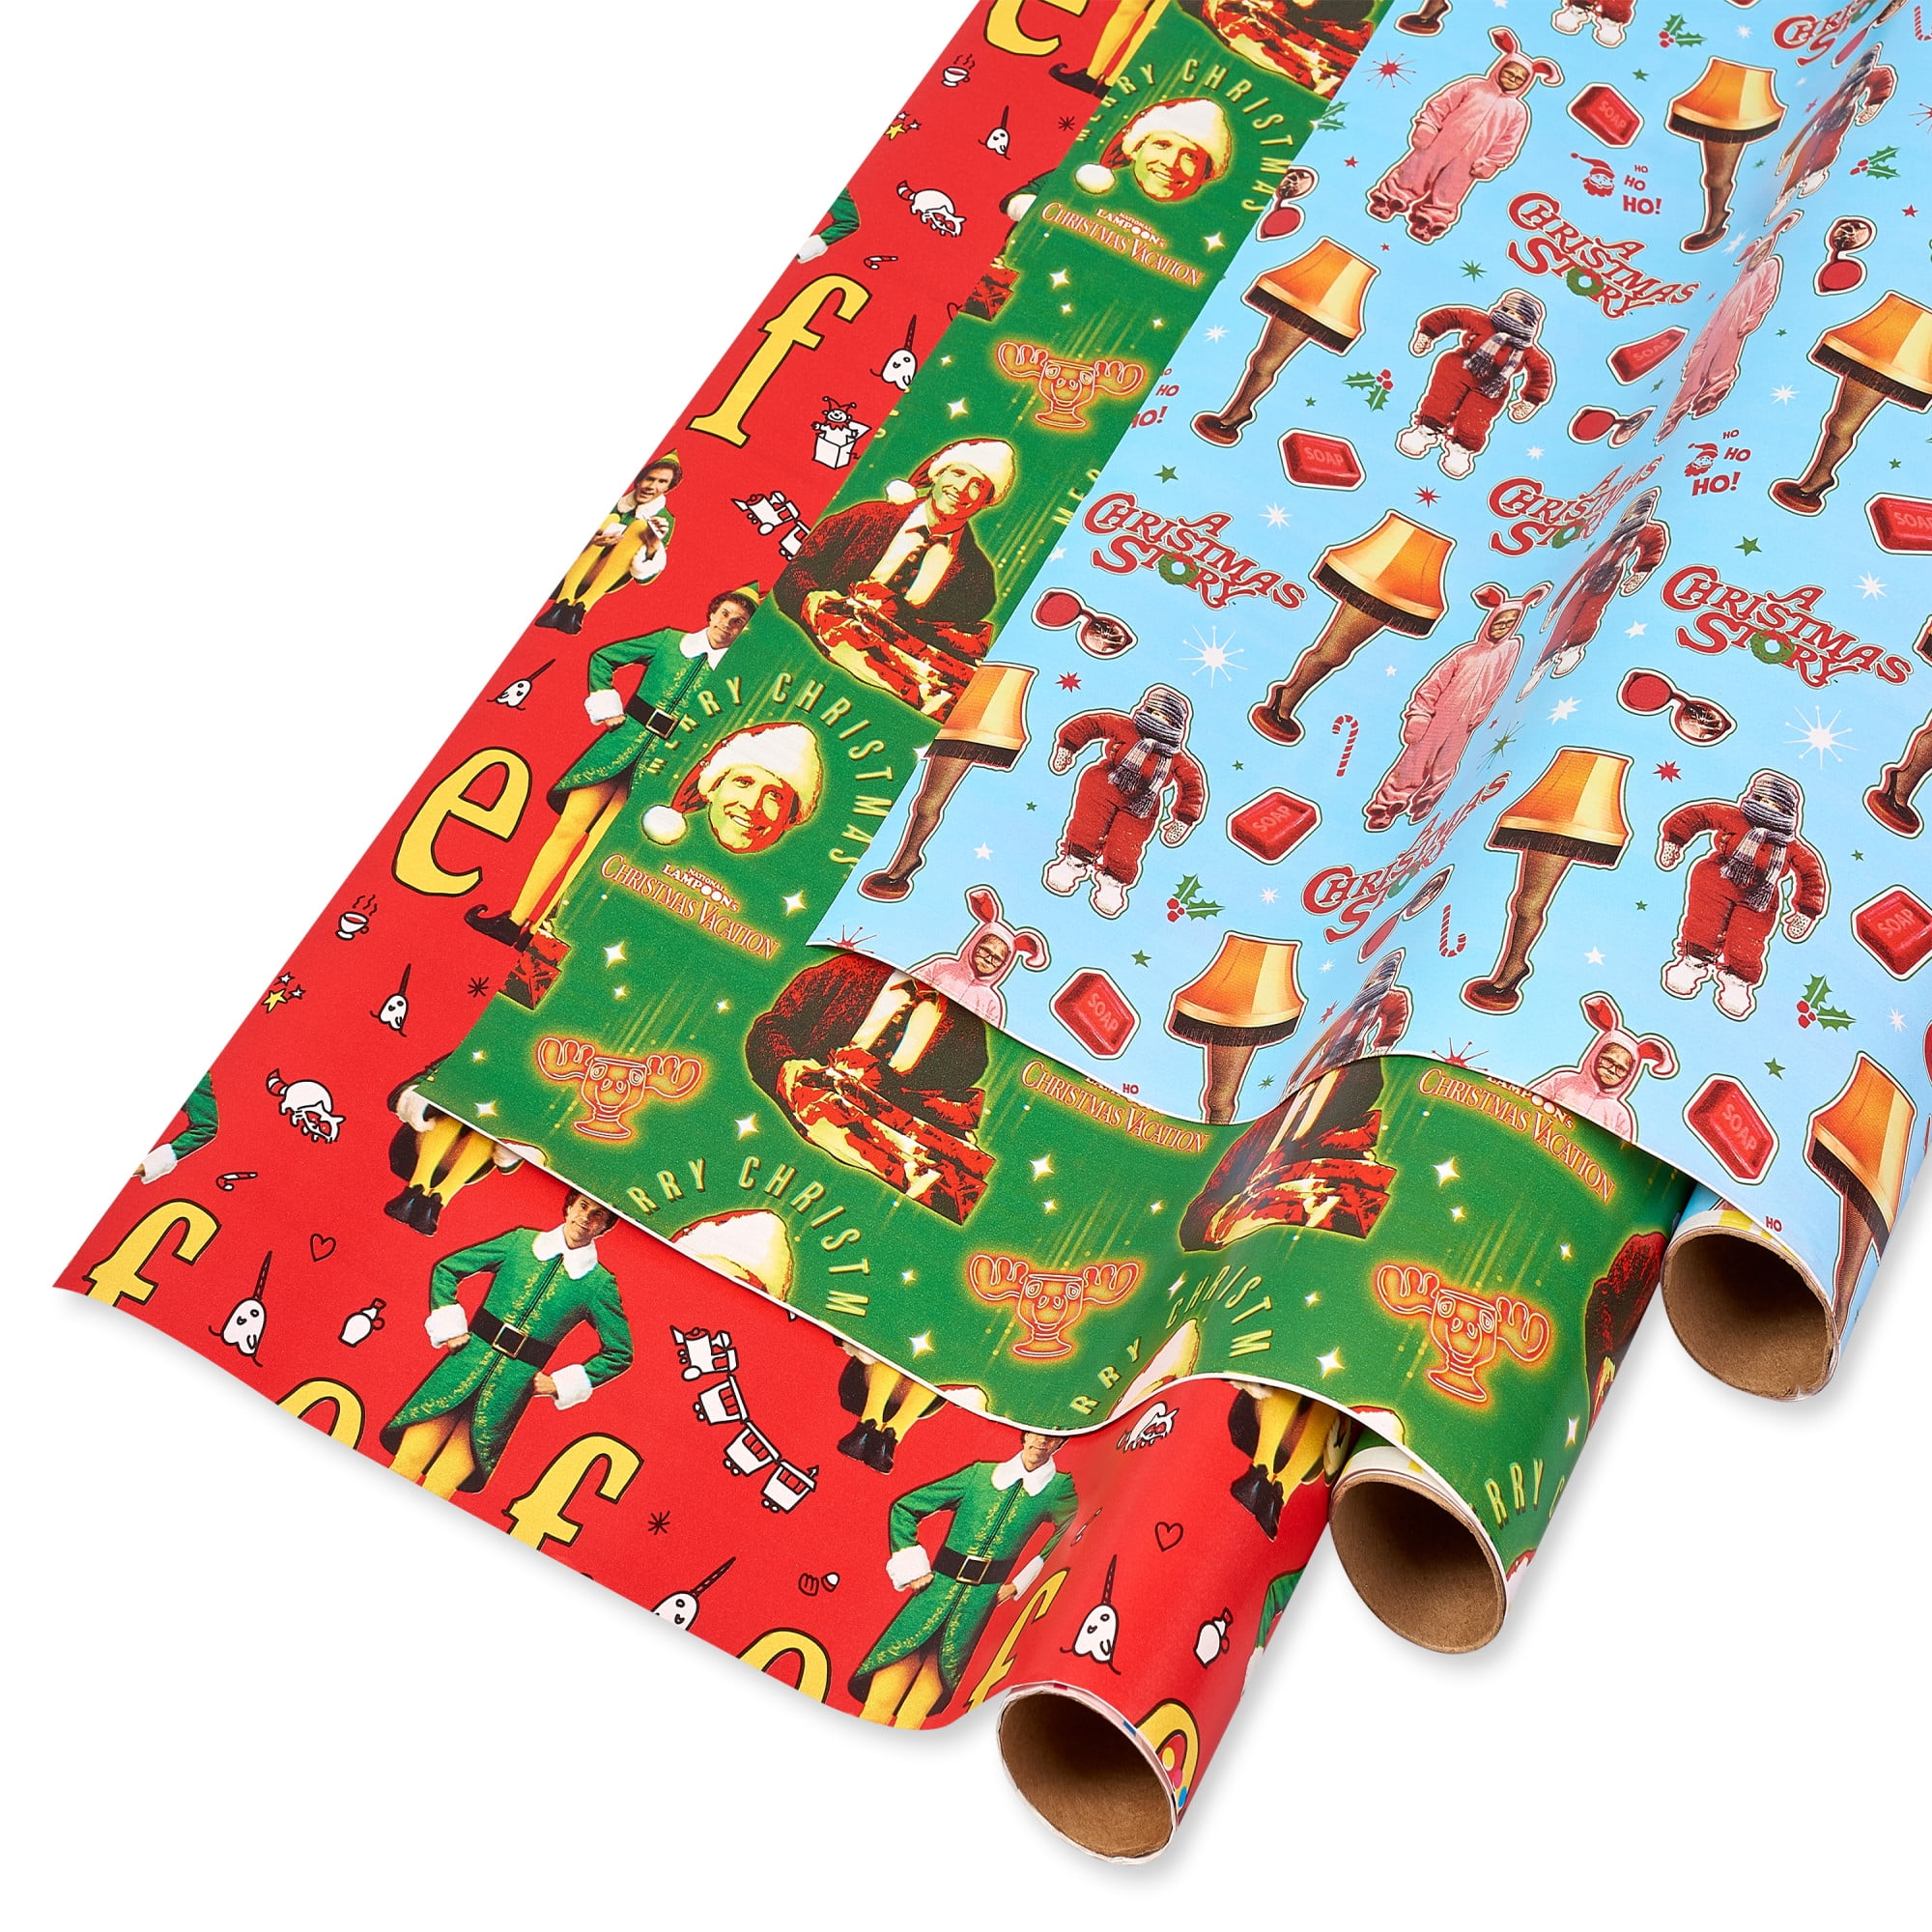 American Greetings Vintage Christmas Wrapping Paper Bundle, Reversible Designs (4 Rolls, 7 Bows, 30 Gift Tags), Size: Medium